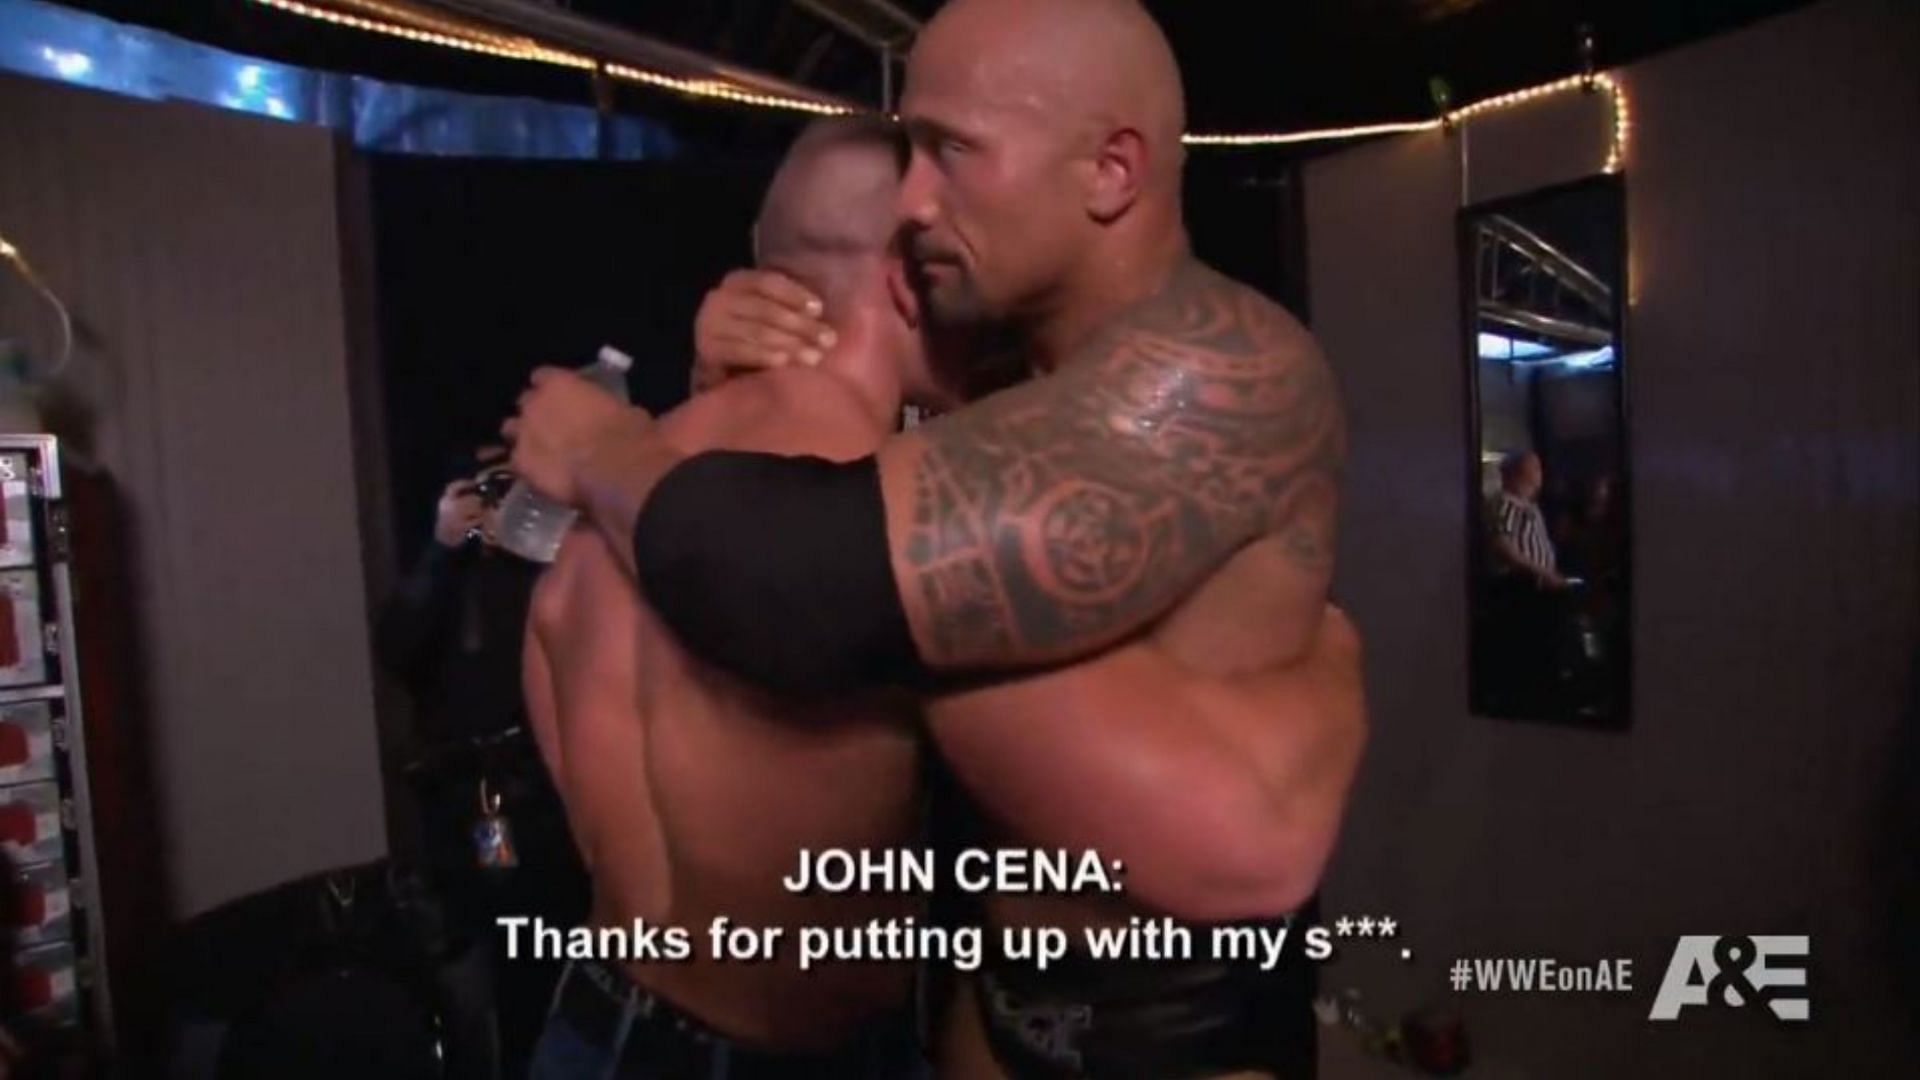 The Rock and John Cena buried the hatchet after their match at WWE WrestleMania 28